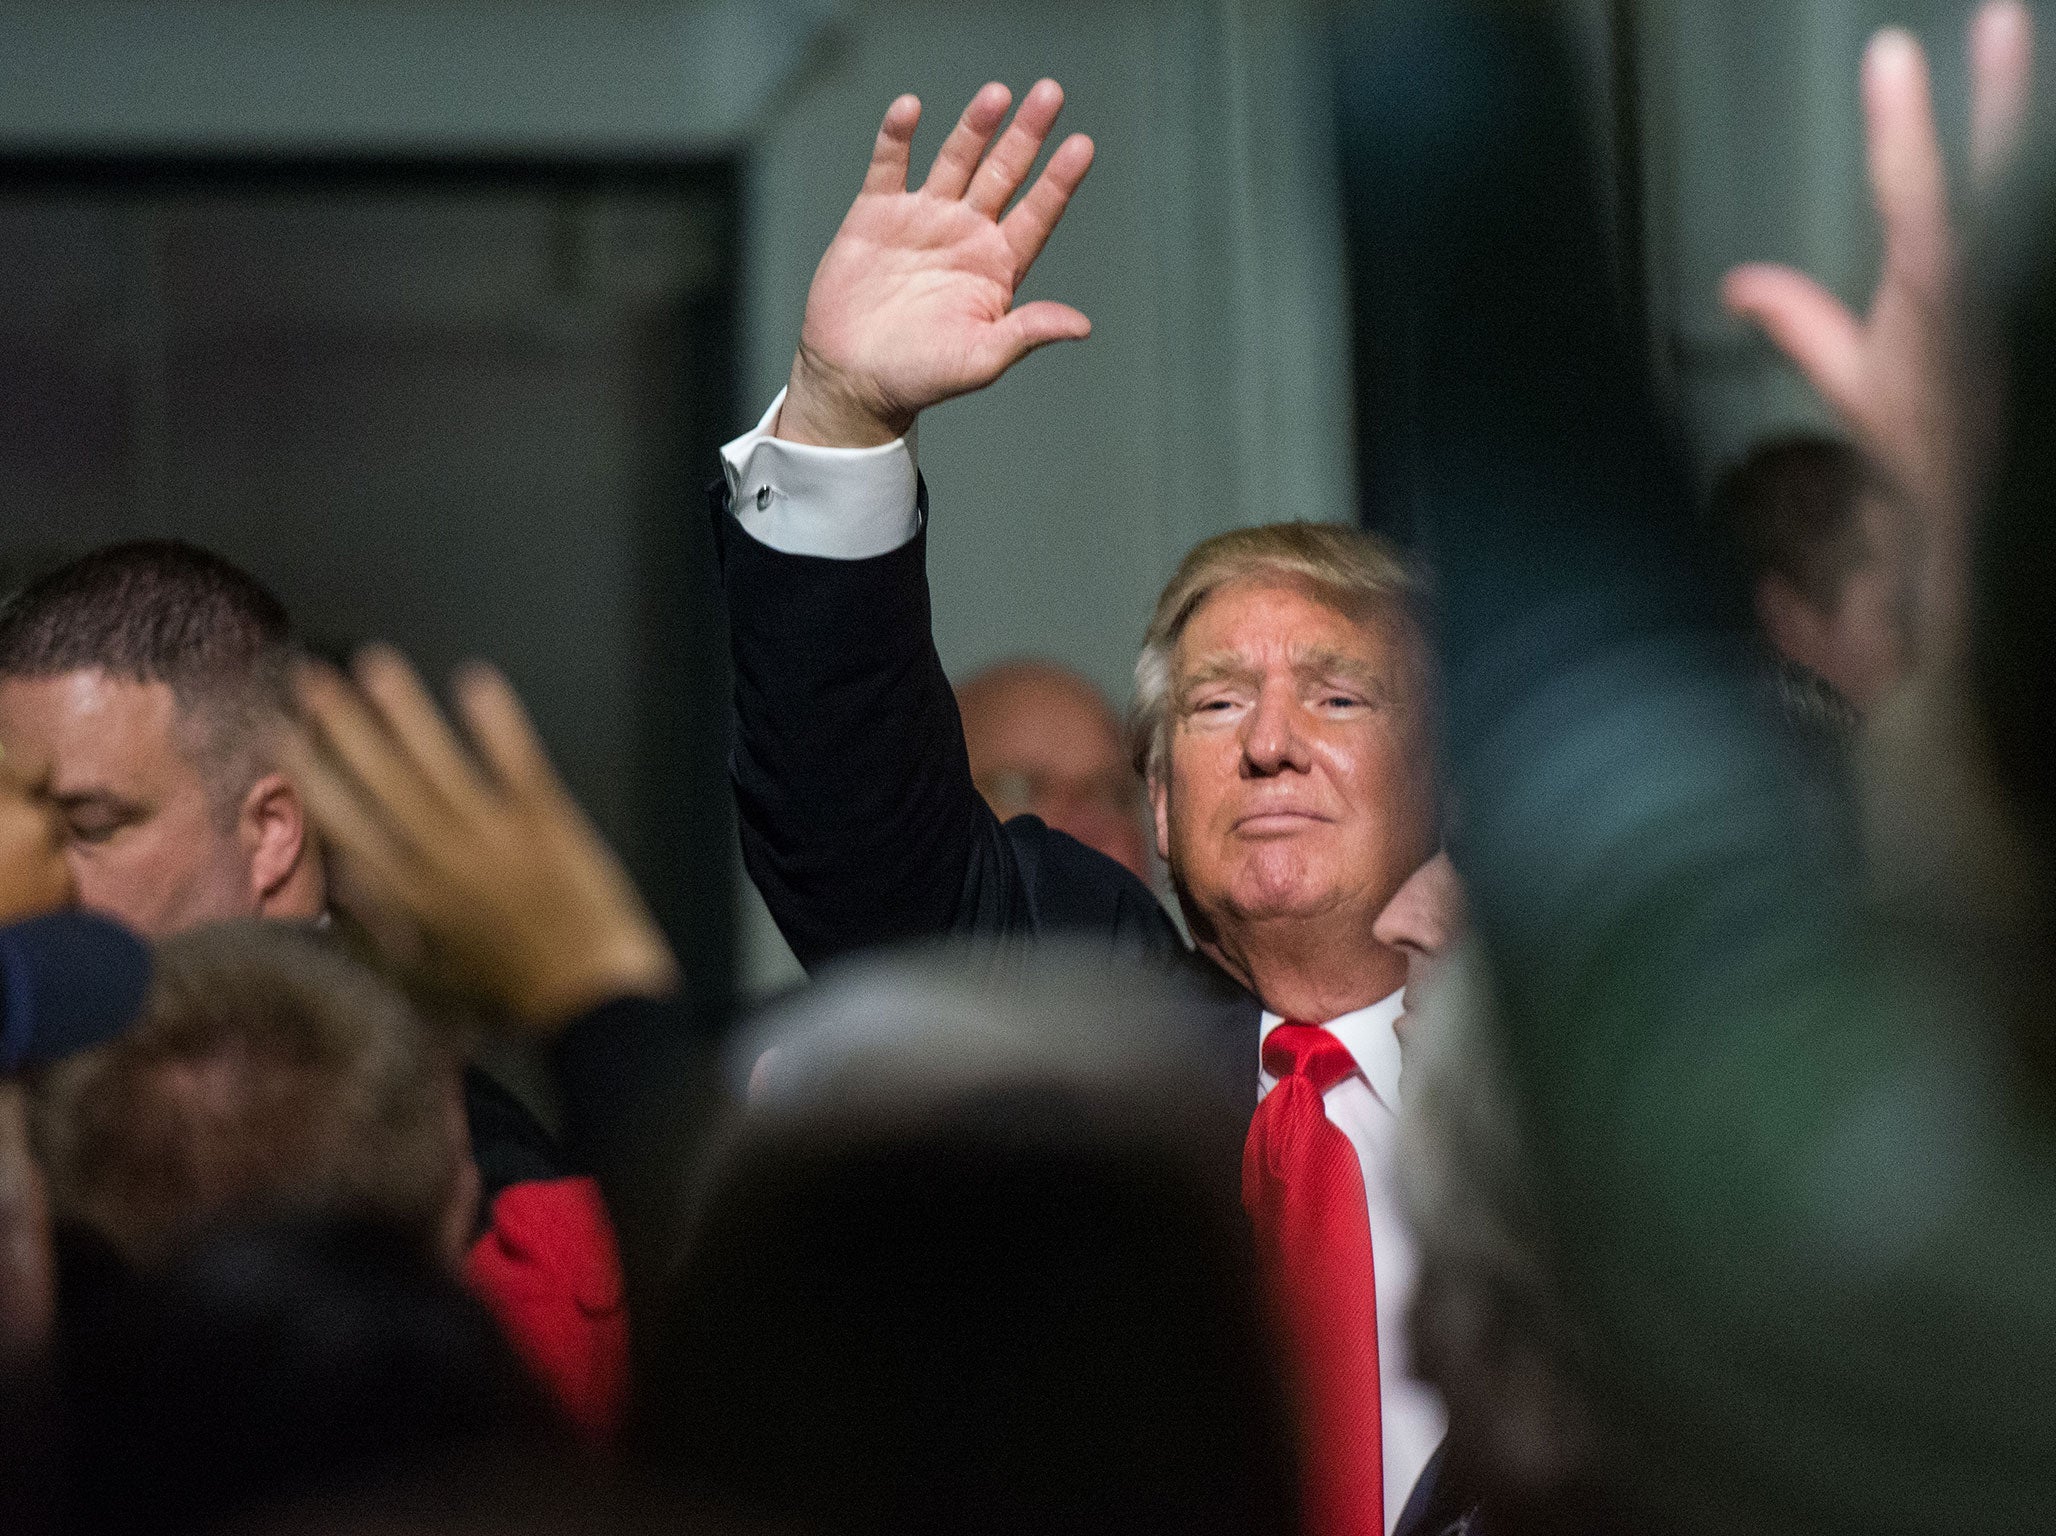 Republican presidential candidate Donald Trump waves to the crowd at a Pearl Harbor Day Rally at the U.S.S. Yorktown December 7, 2015 in Mt. Pleasant, South Carolina. The South Carolina Republican primary is scheduled for February 20, 2016